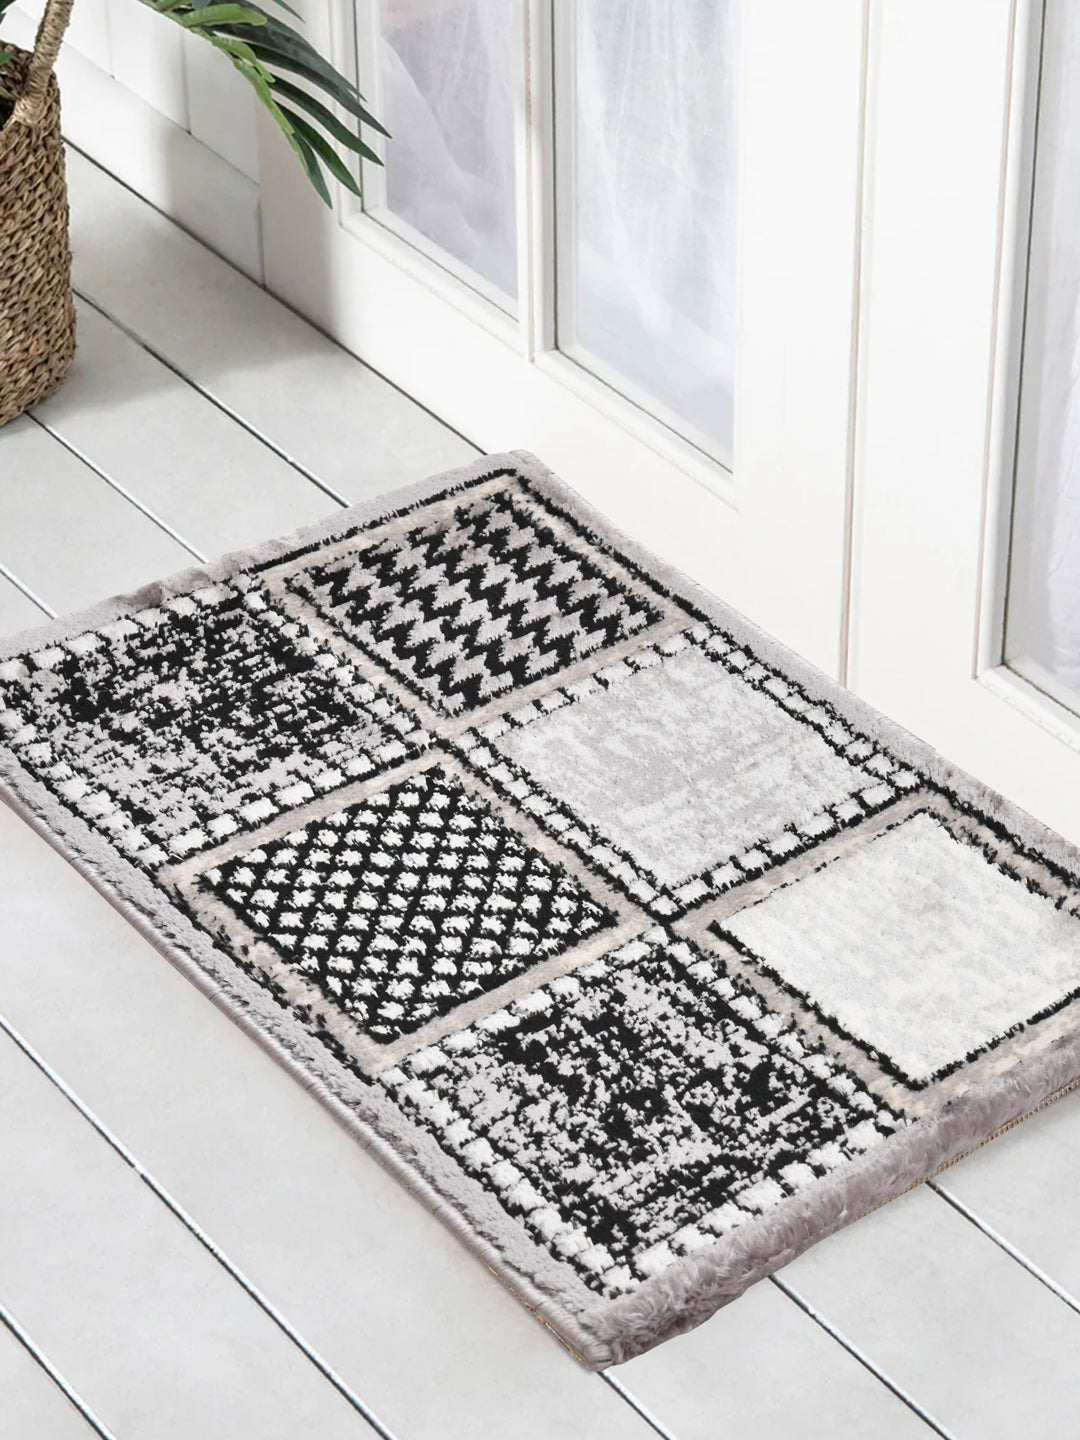 Doormat With Anti Skid Backing; 16x24 Inches; Grey Black Checks